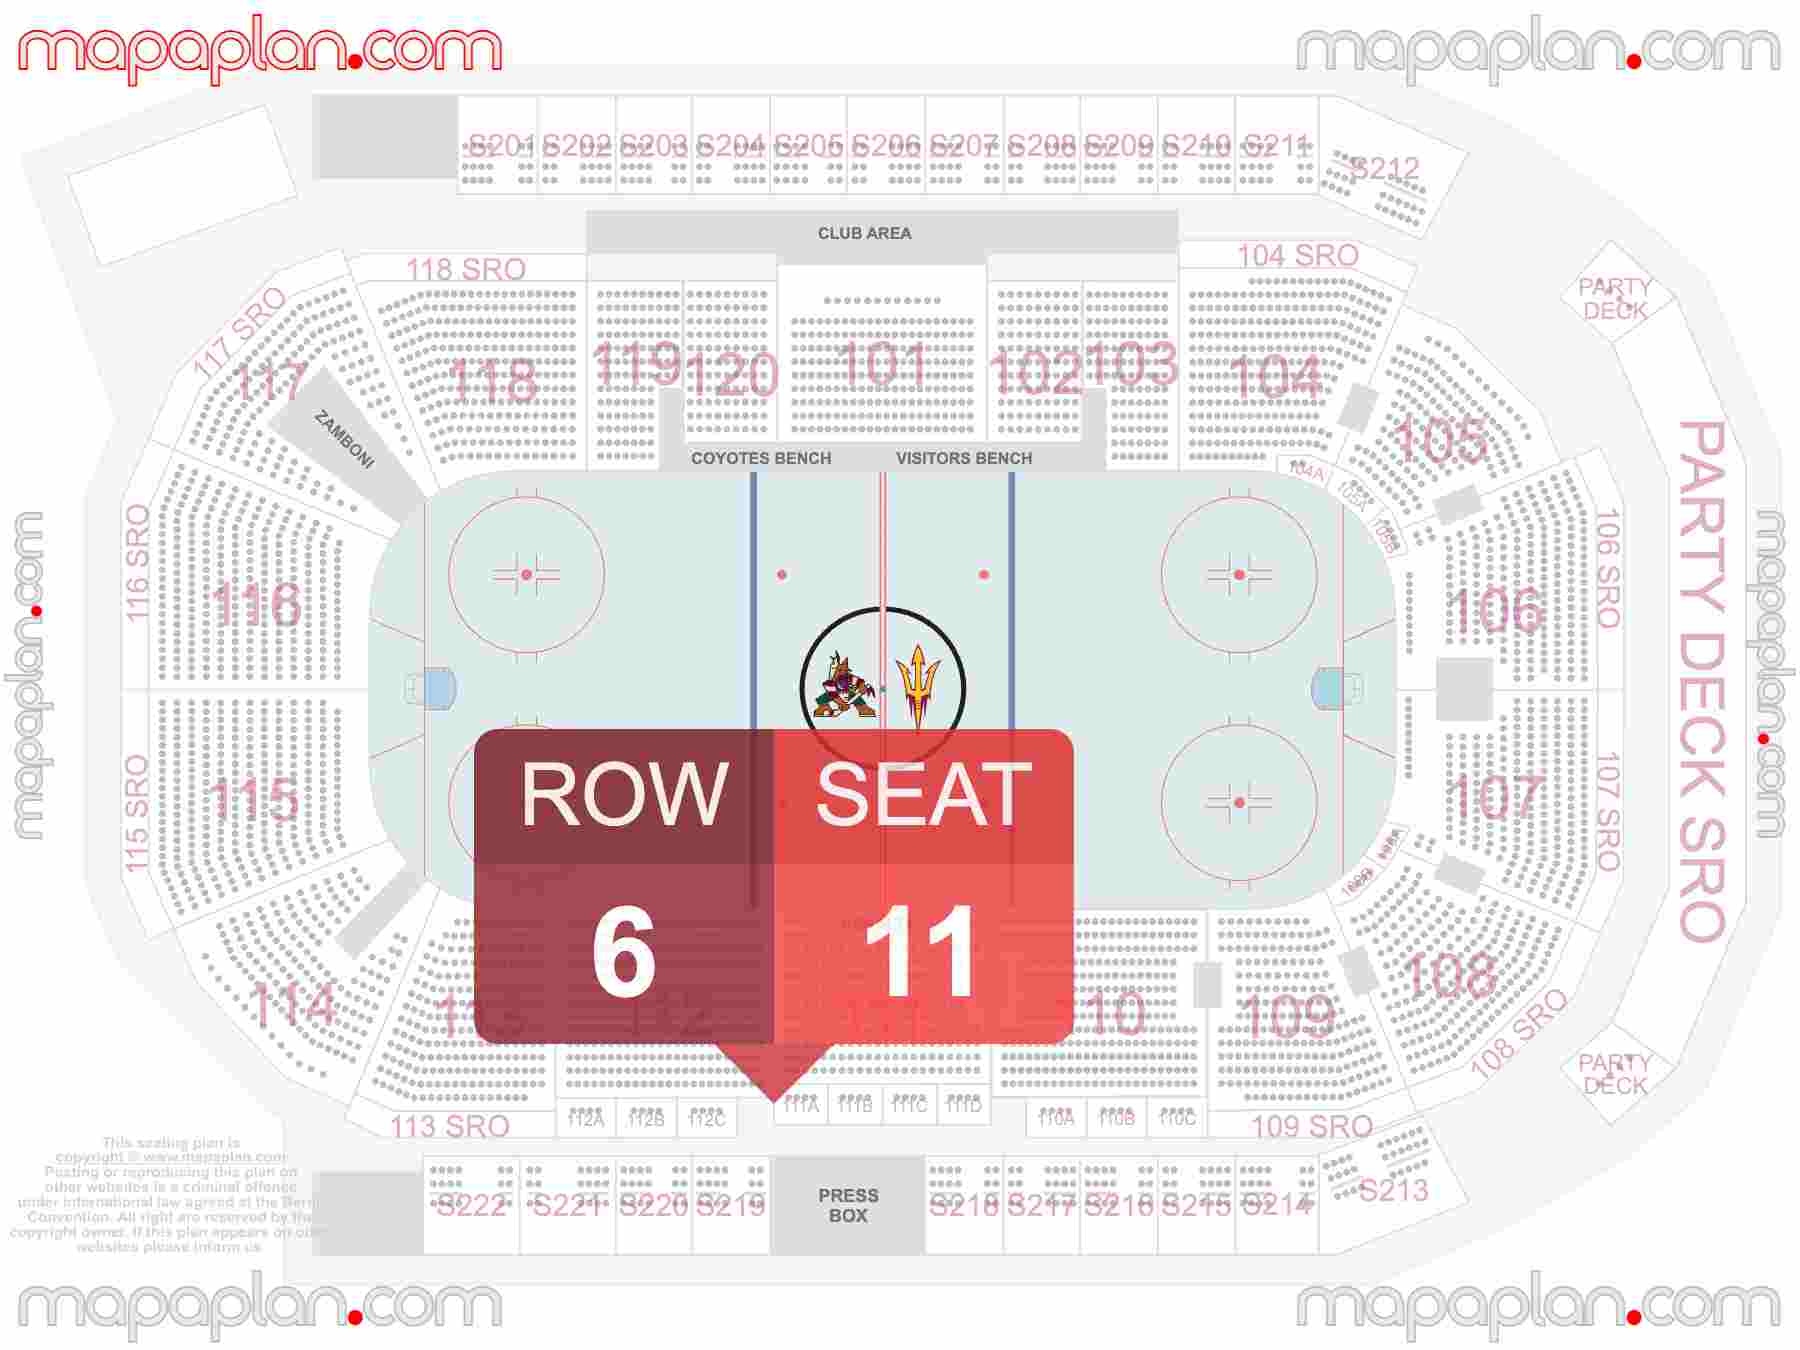 Tempe Mullett Arena seating chart Arizona Coyotes hockey inside capacity view arrangement plan - Interactive virtual 3d best seats & rows detailed stadium image configuration layout